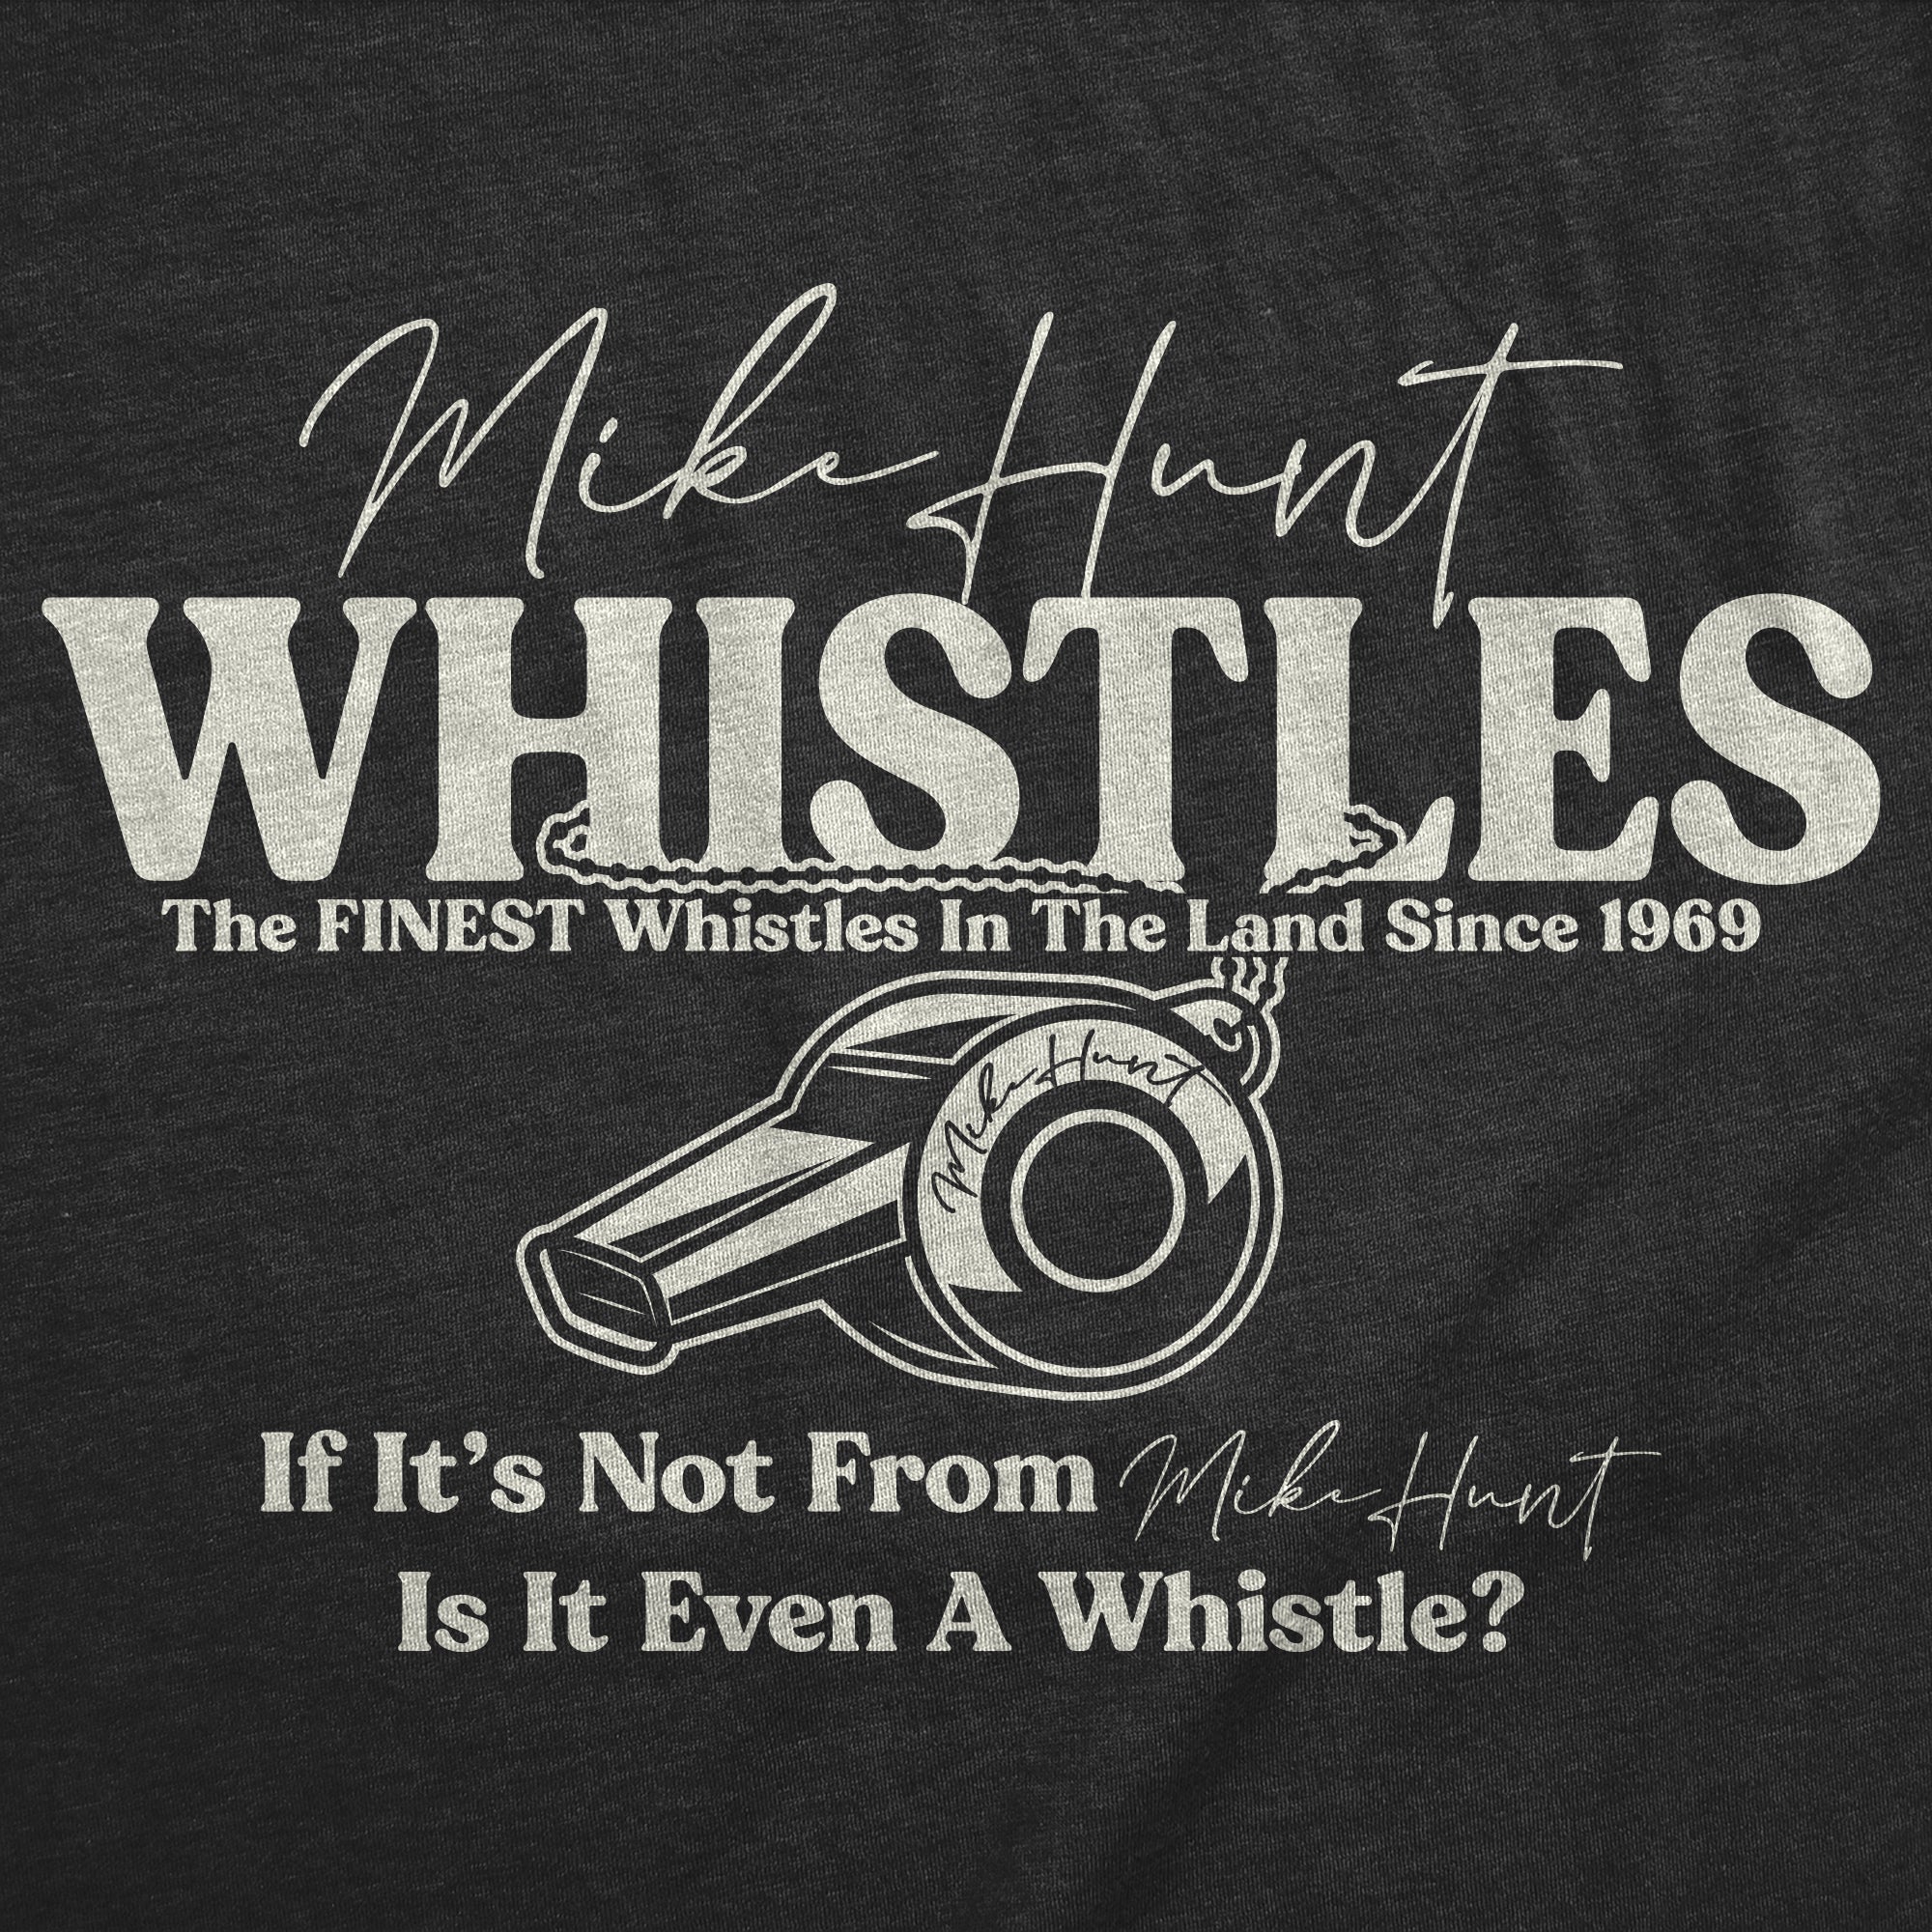 Funny Heather Black - Mike Hunt Whistles Mike Hunt Whistles Mens T Shirt Nerdy sarcastic Tee